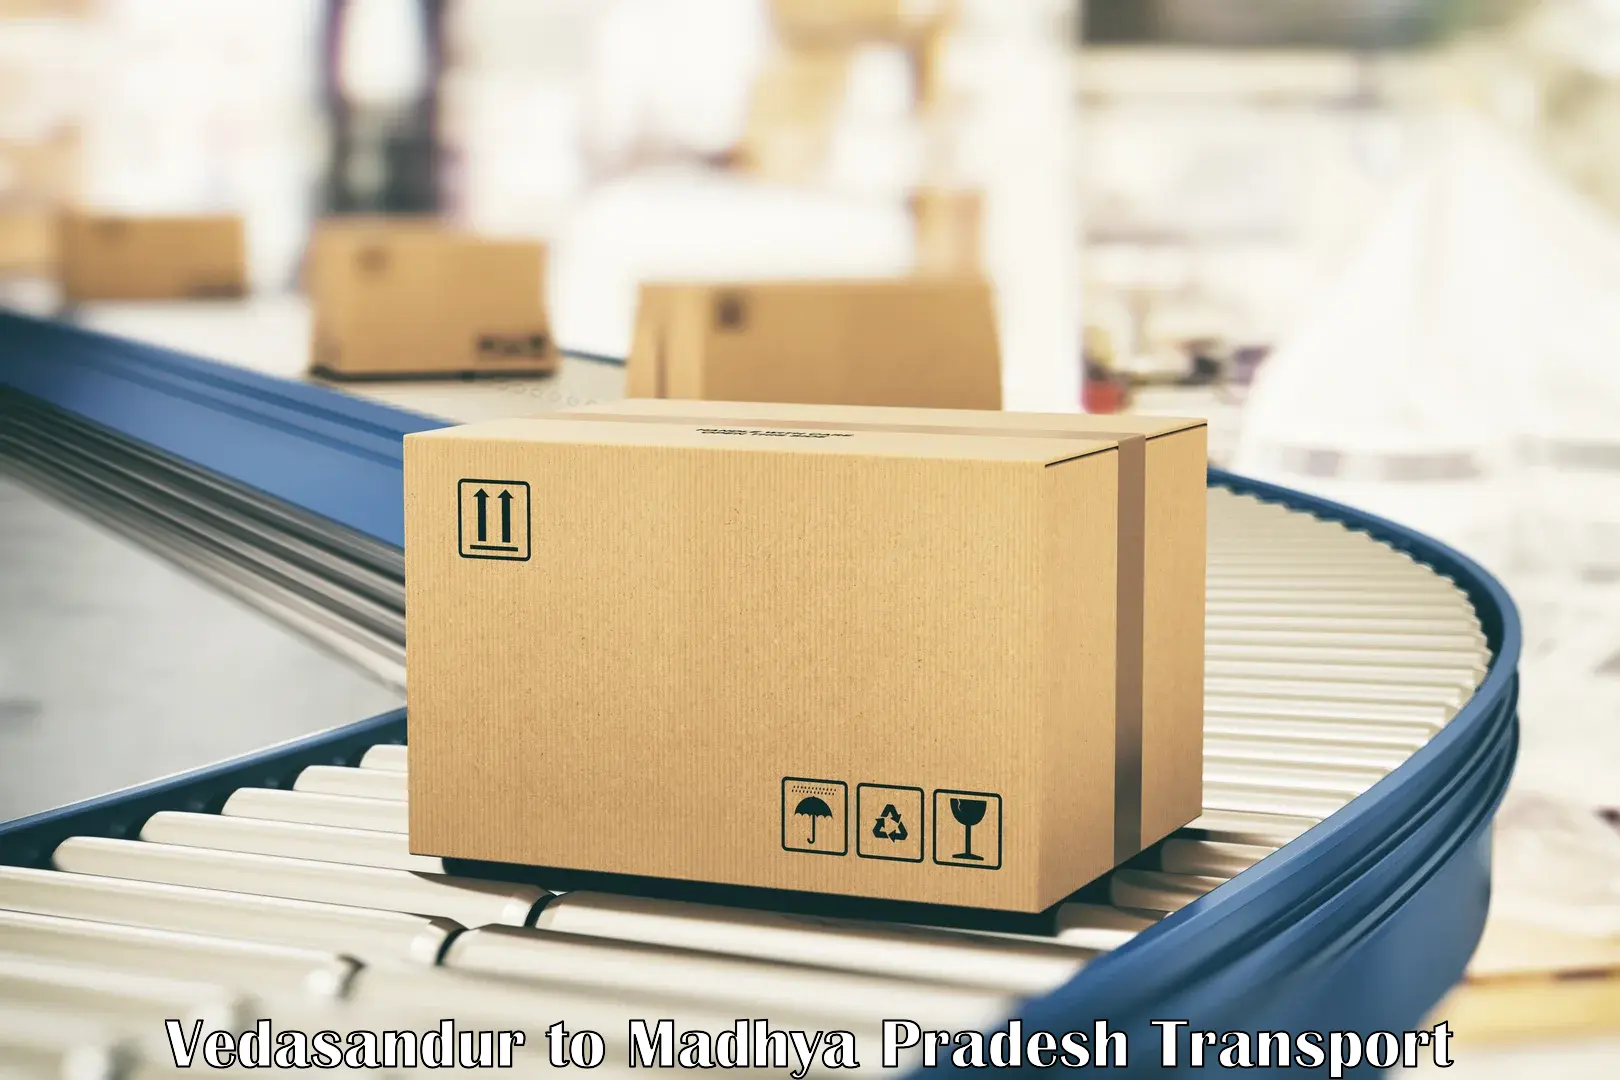 Shipping services Vedasandur to Pachore